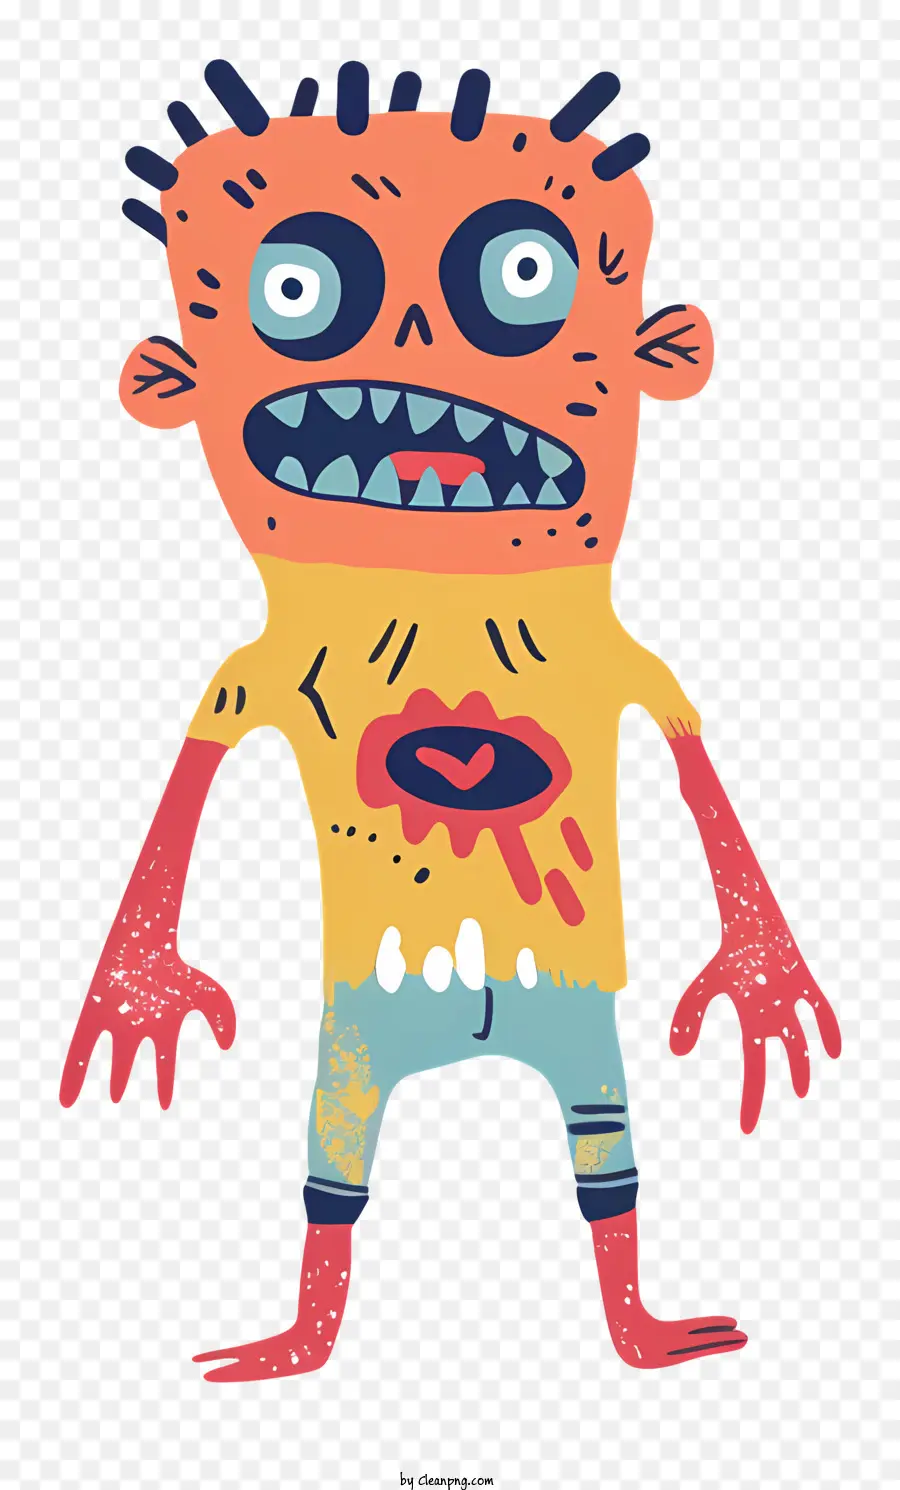 zombie cartoon character friendly creature scary face bright yellow shirt